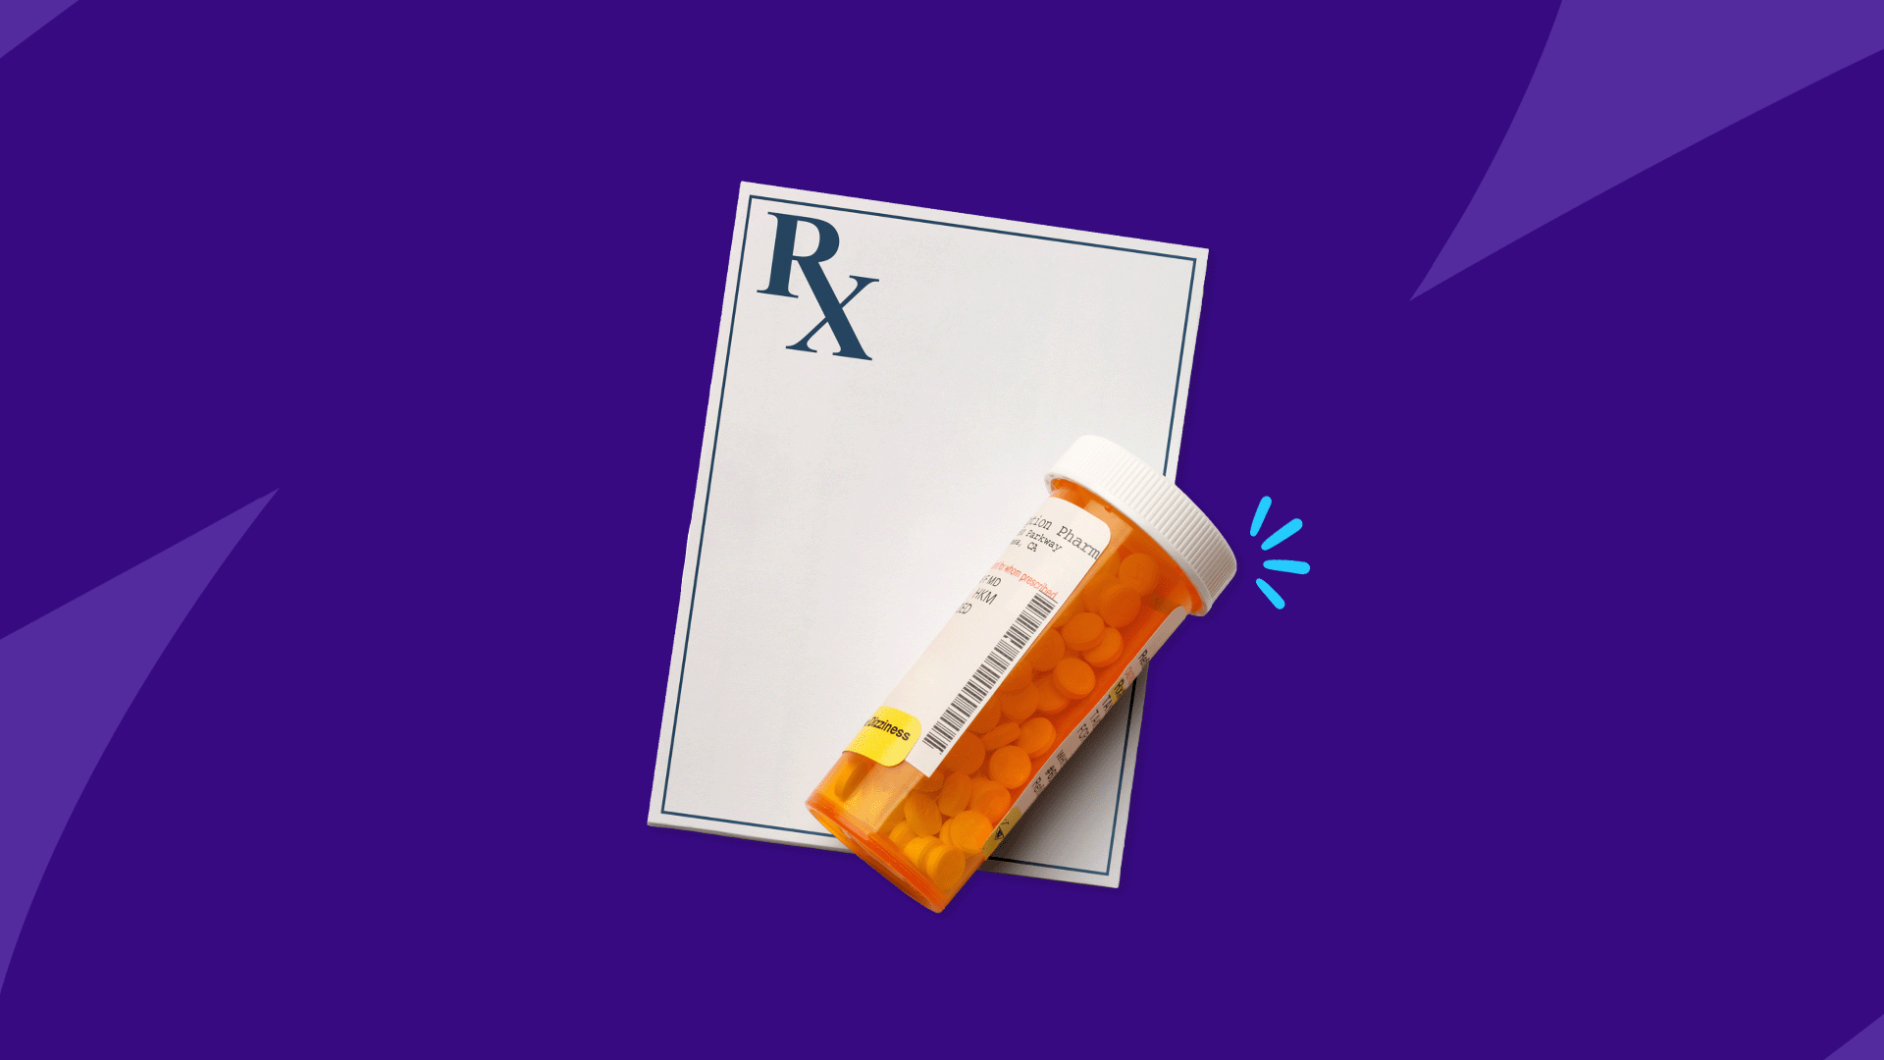 Rx pill bottle and prescription pad: Clindamycin interactions